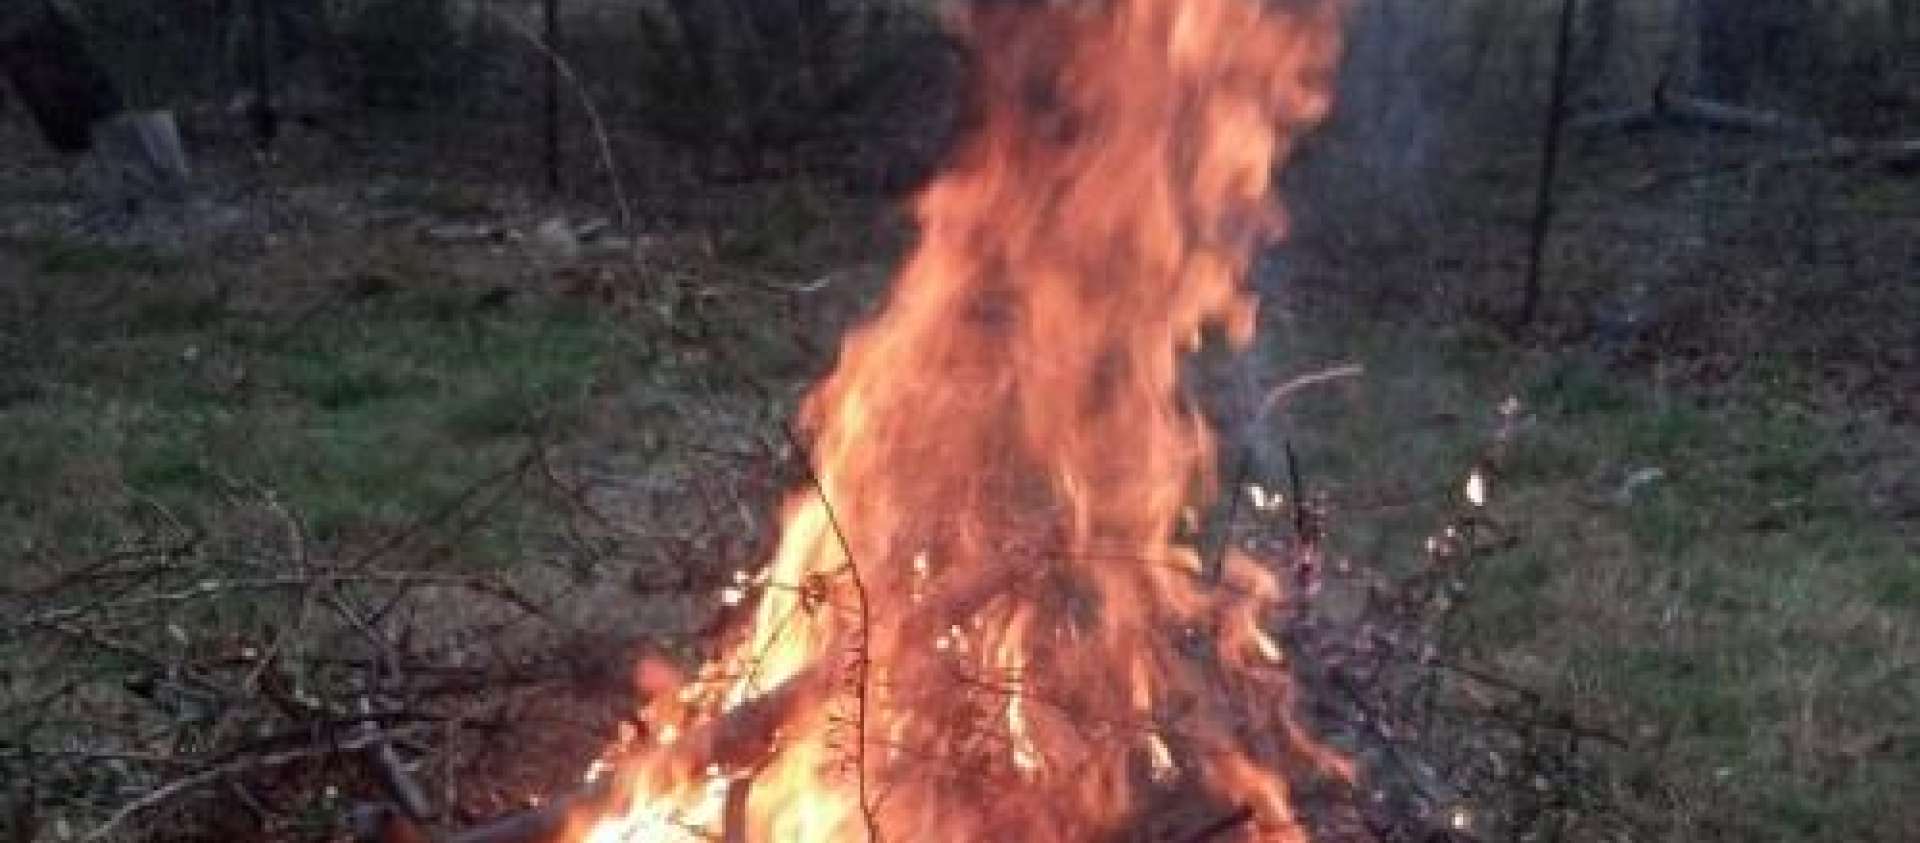 picture of an open air burn